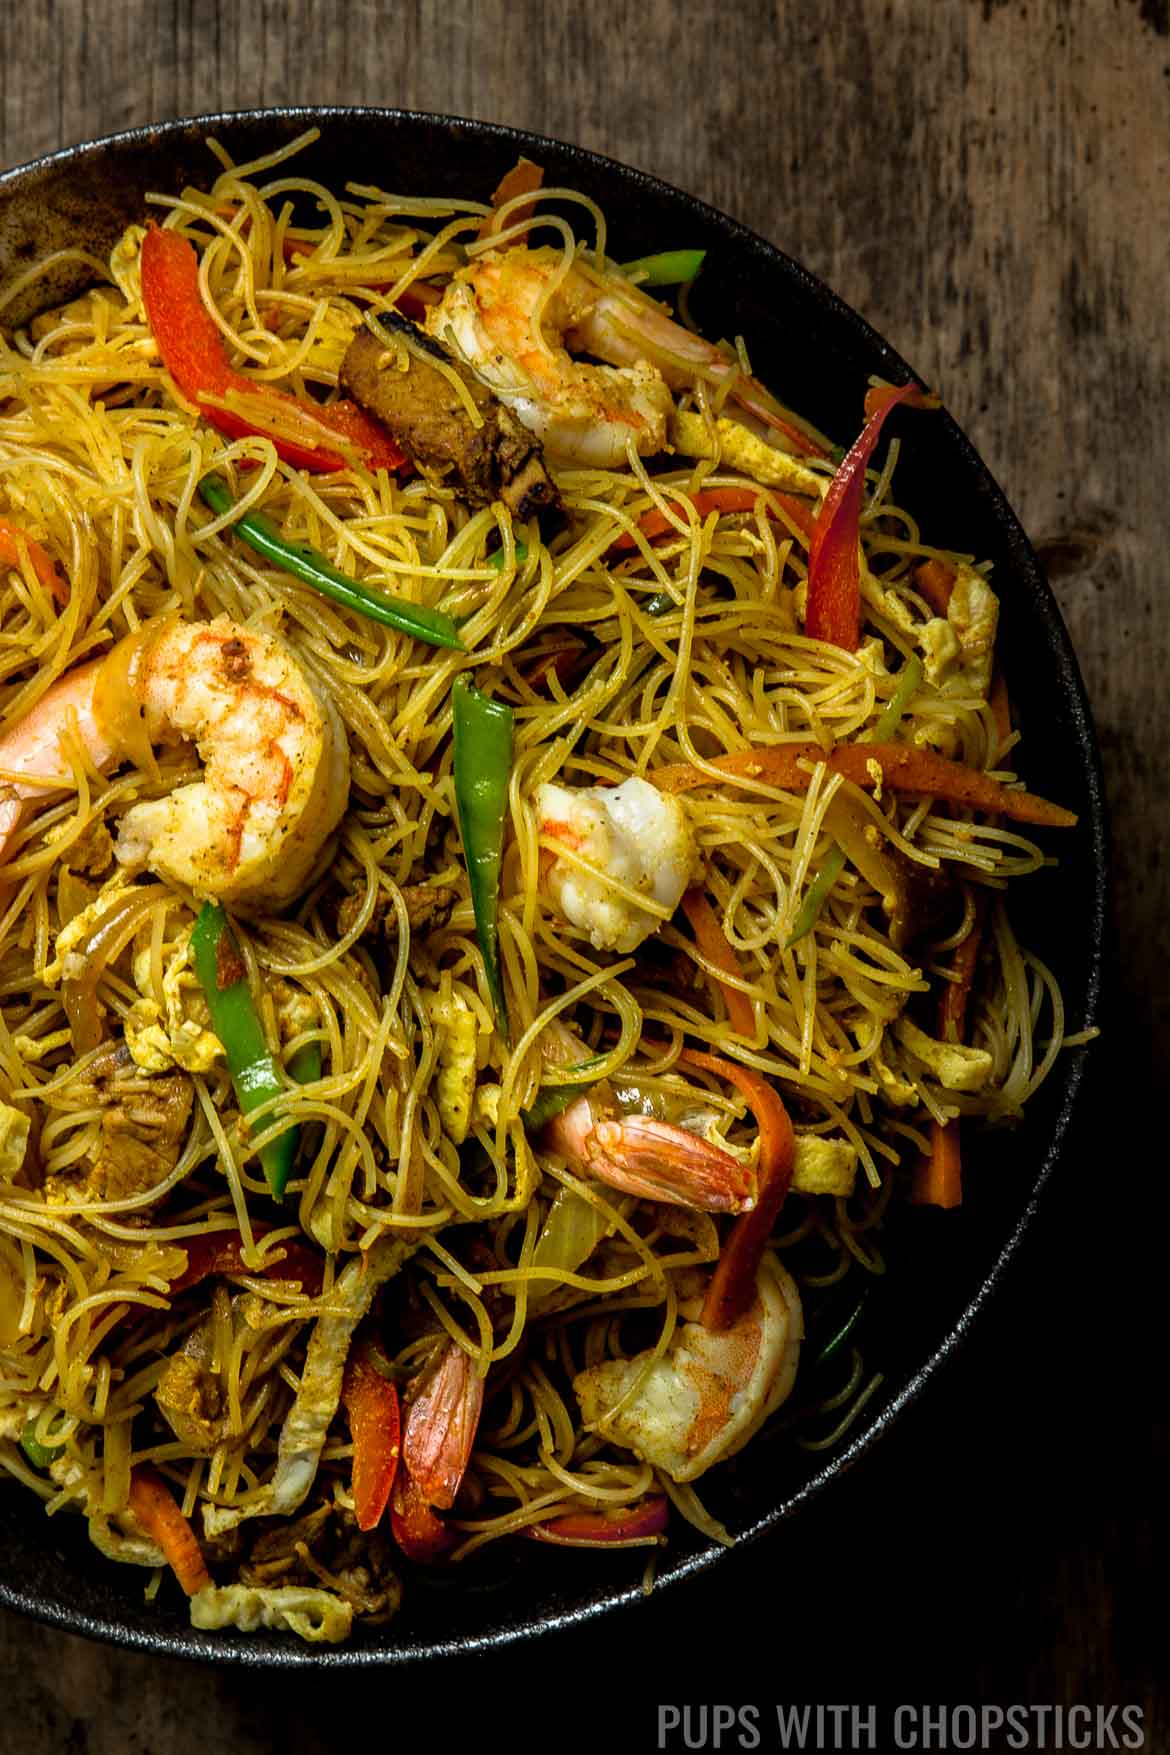 Dry curried Singapore Noodles in a large black bowl on a wooden table